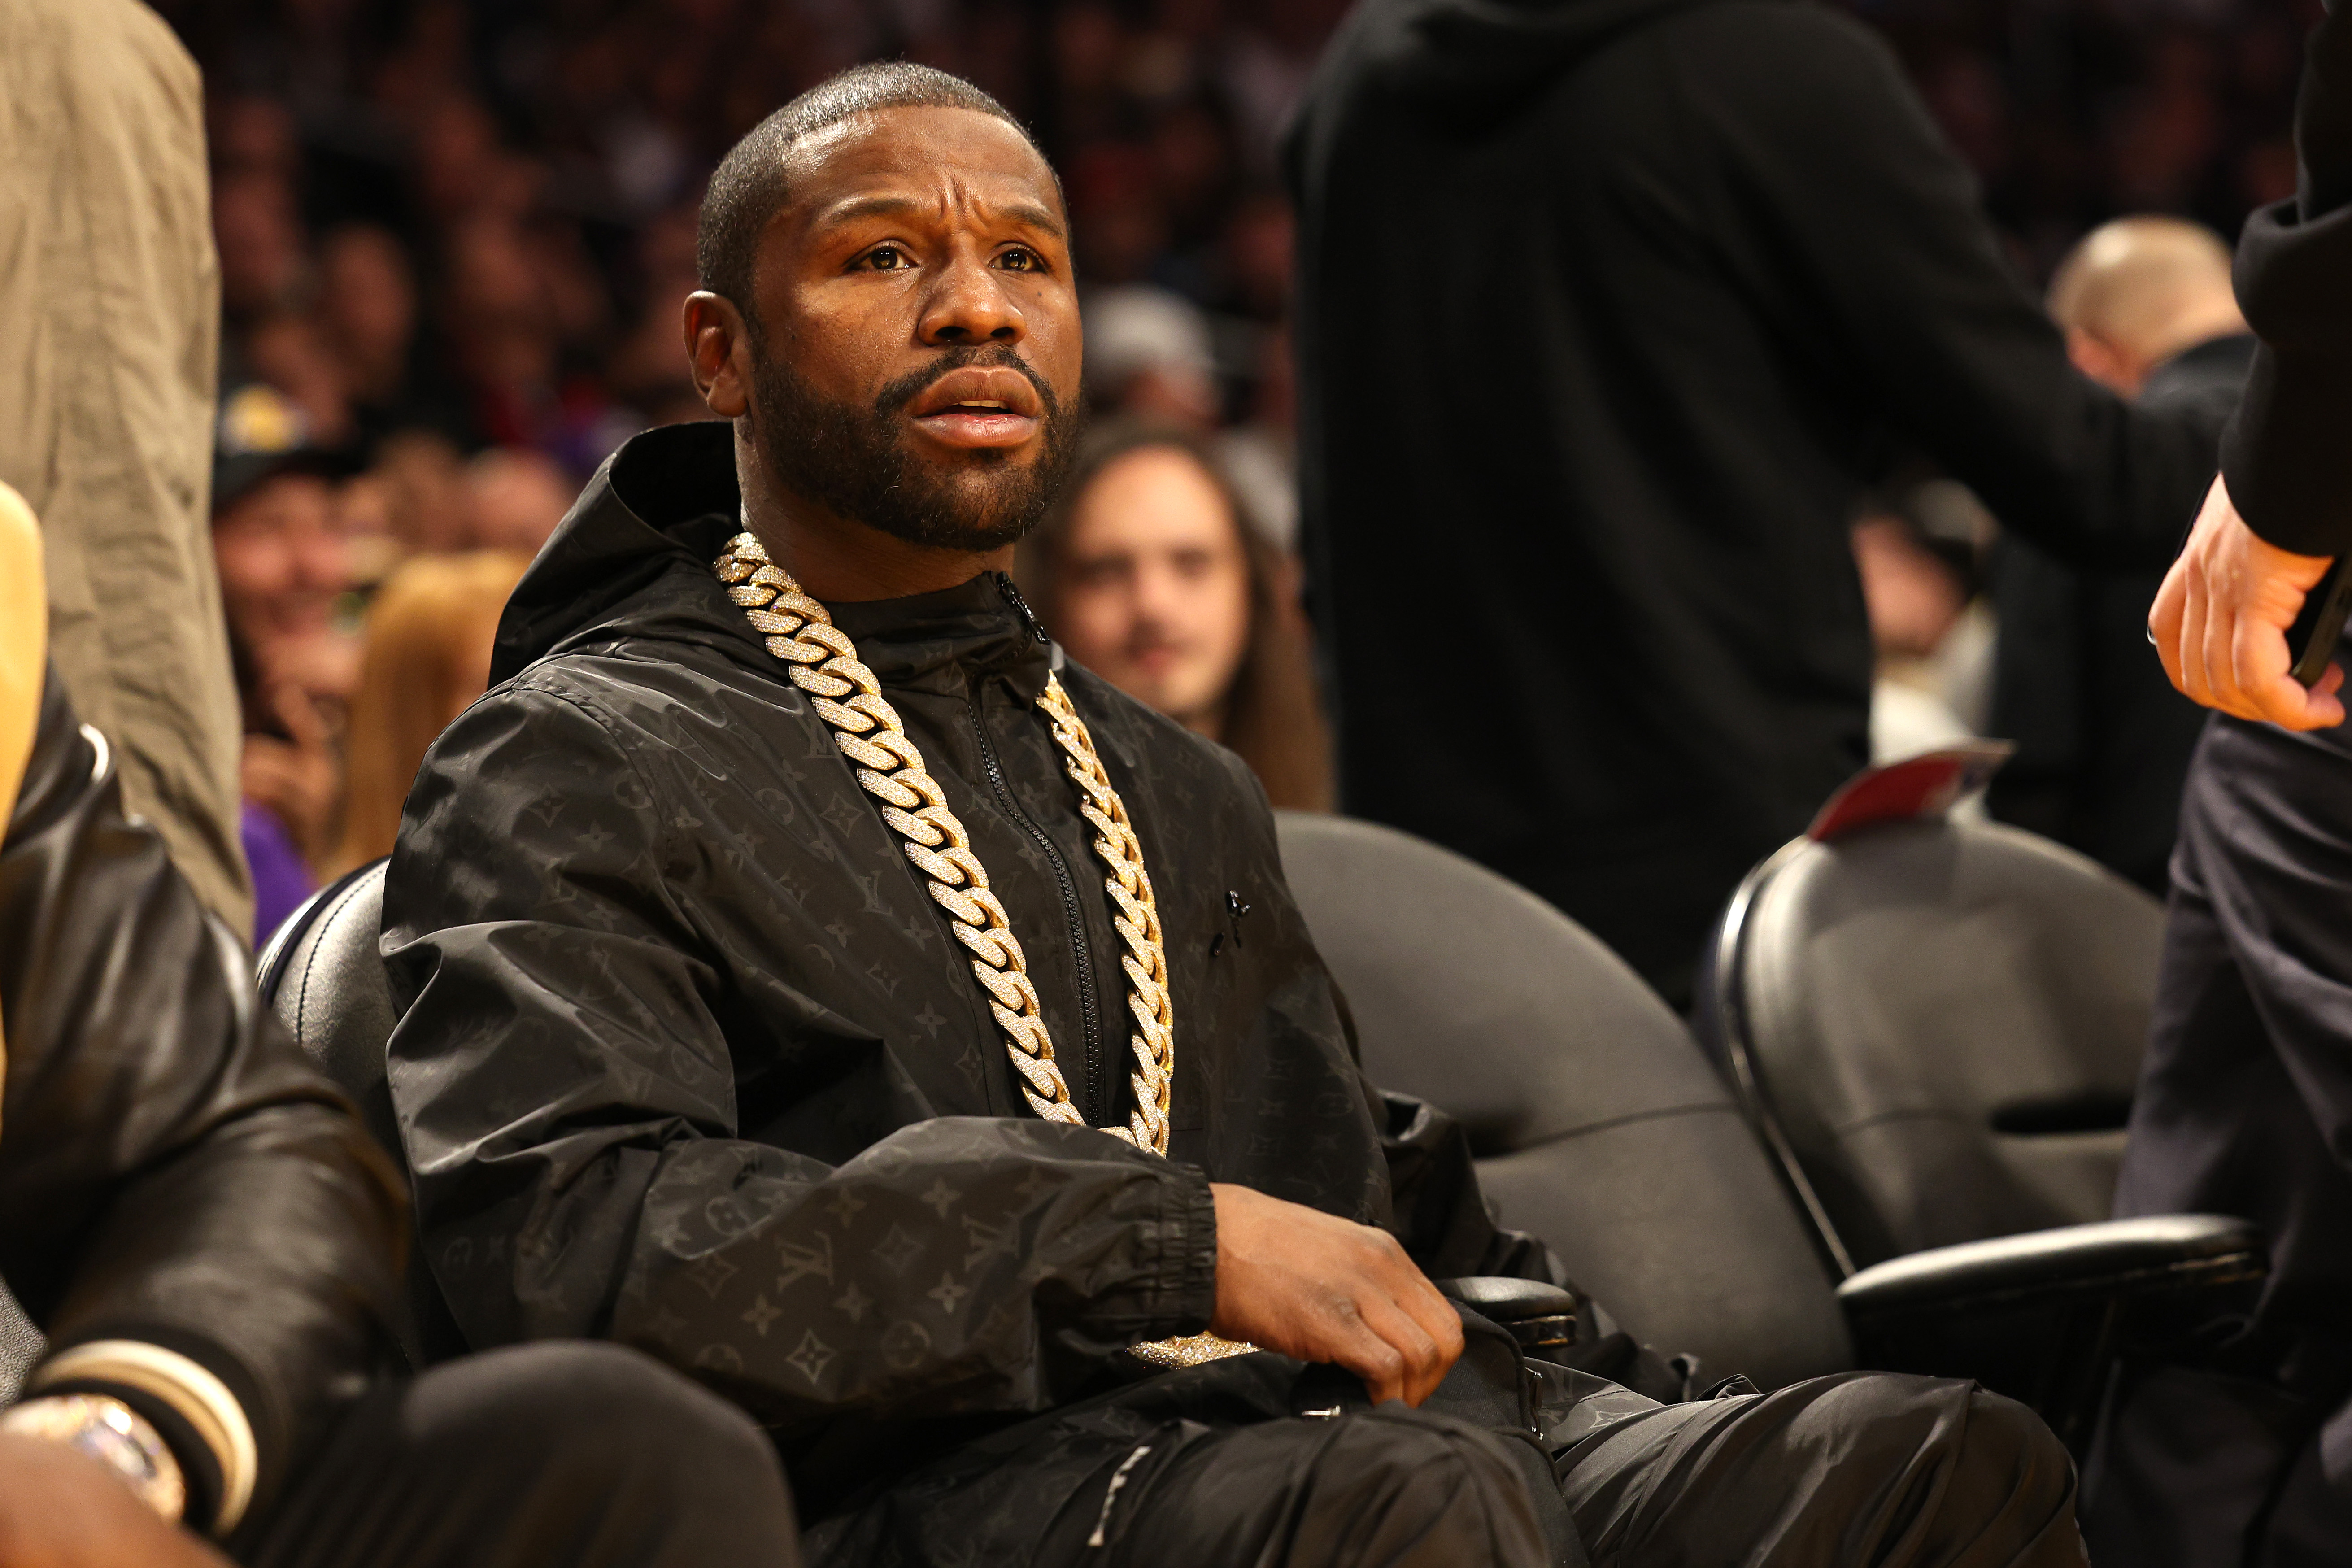 Floyd Mayweather Flexes Line Of Strippers Waiting To Dance For Him: Watch